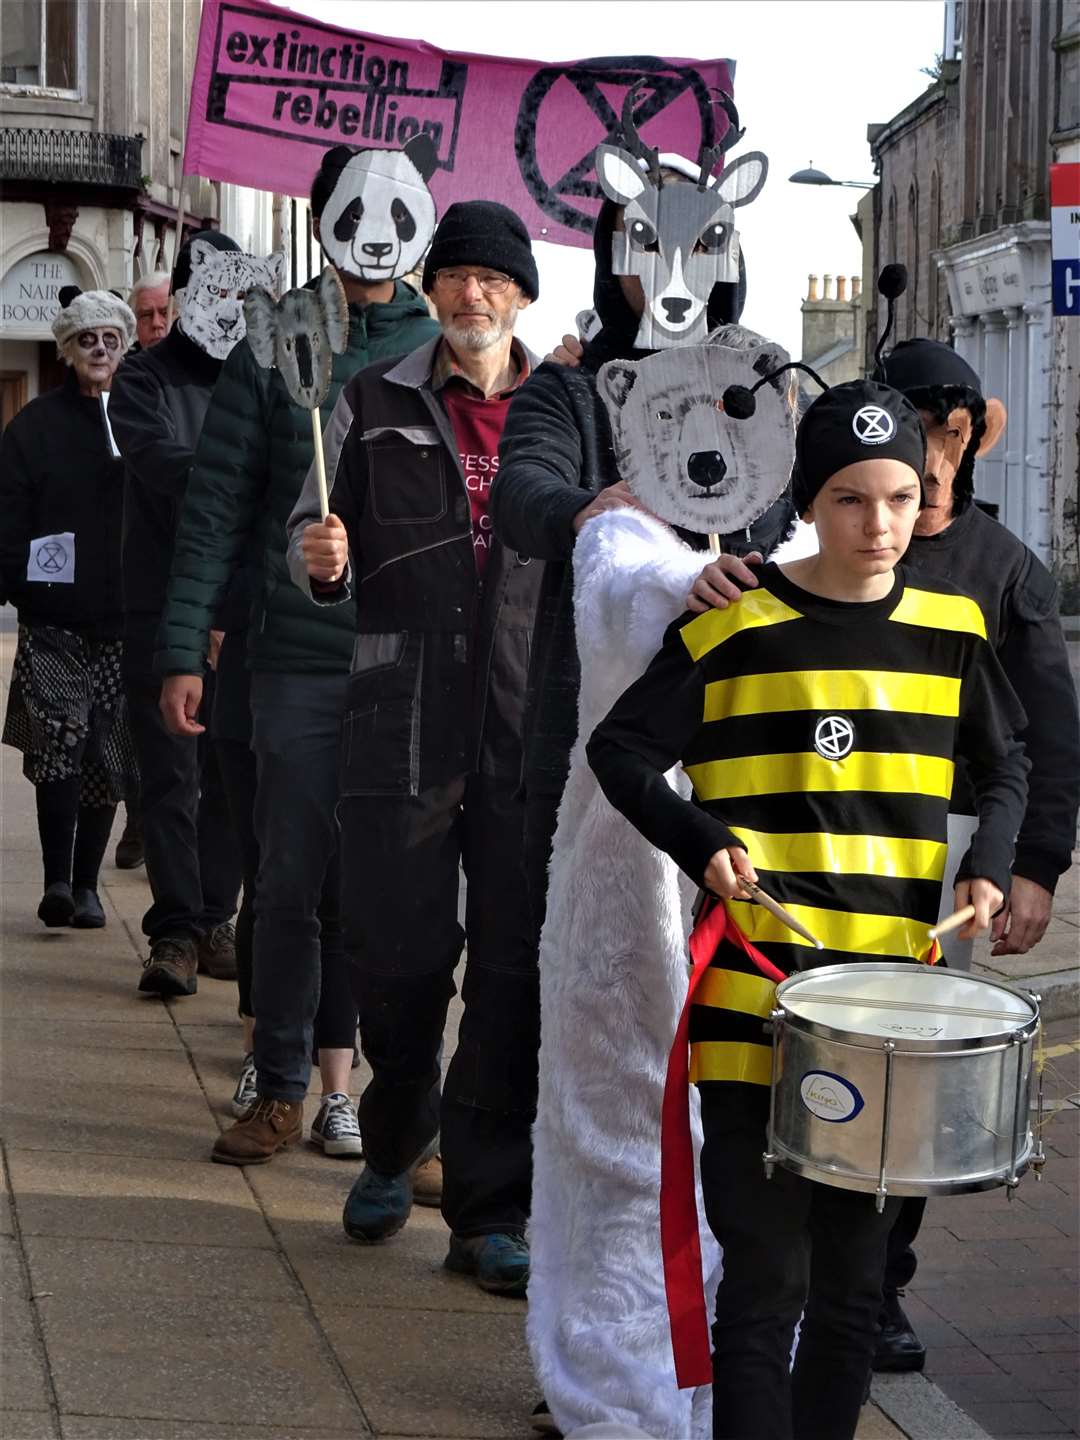 Extinction Rebellion supporters marched through Nairn at the weekend.